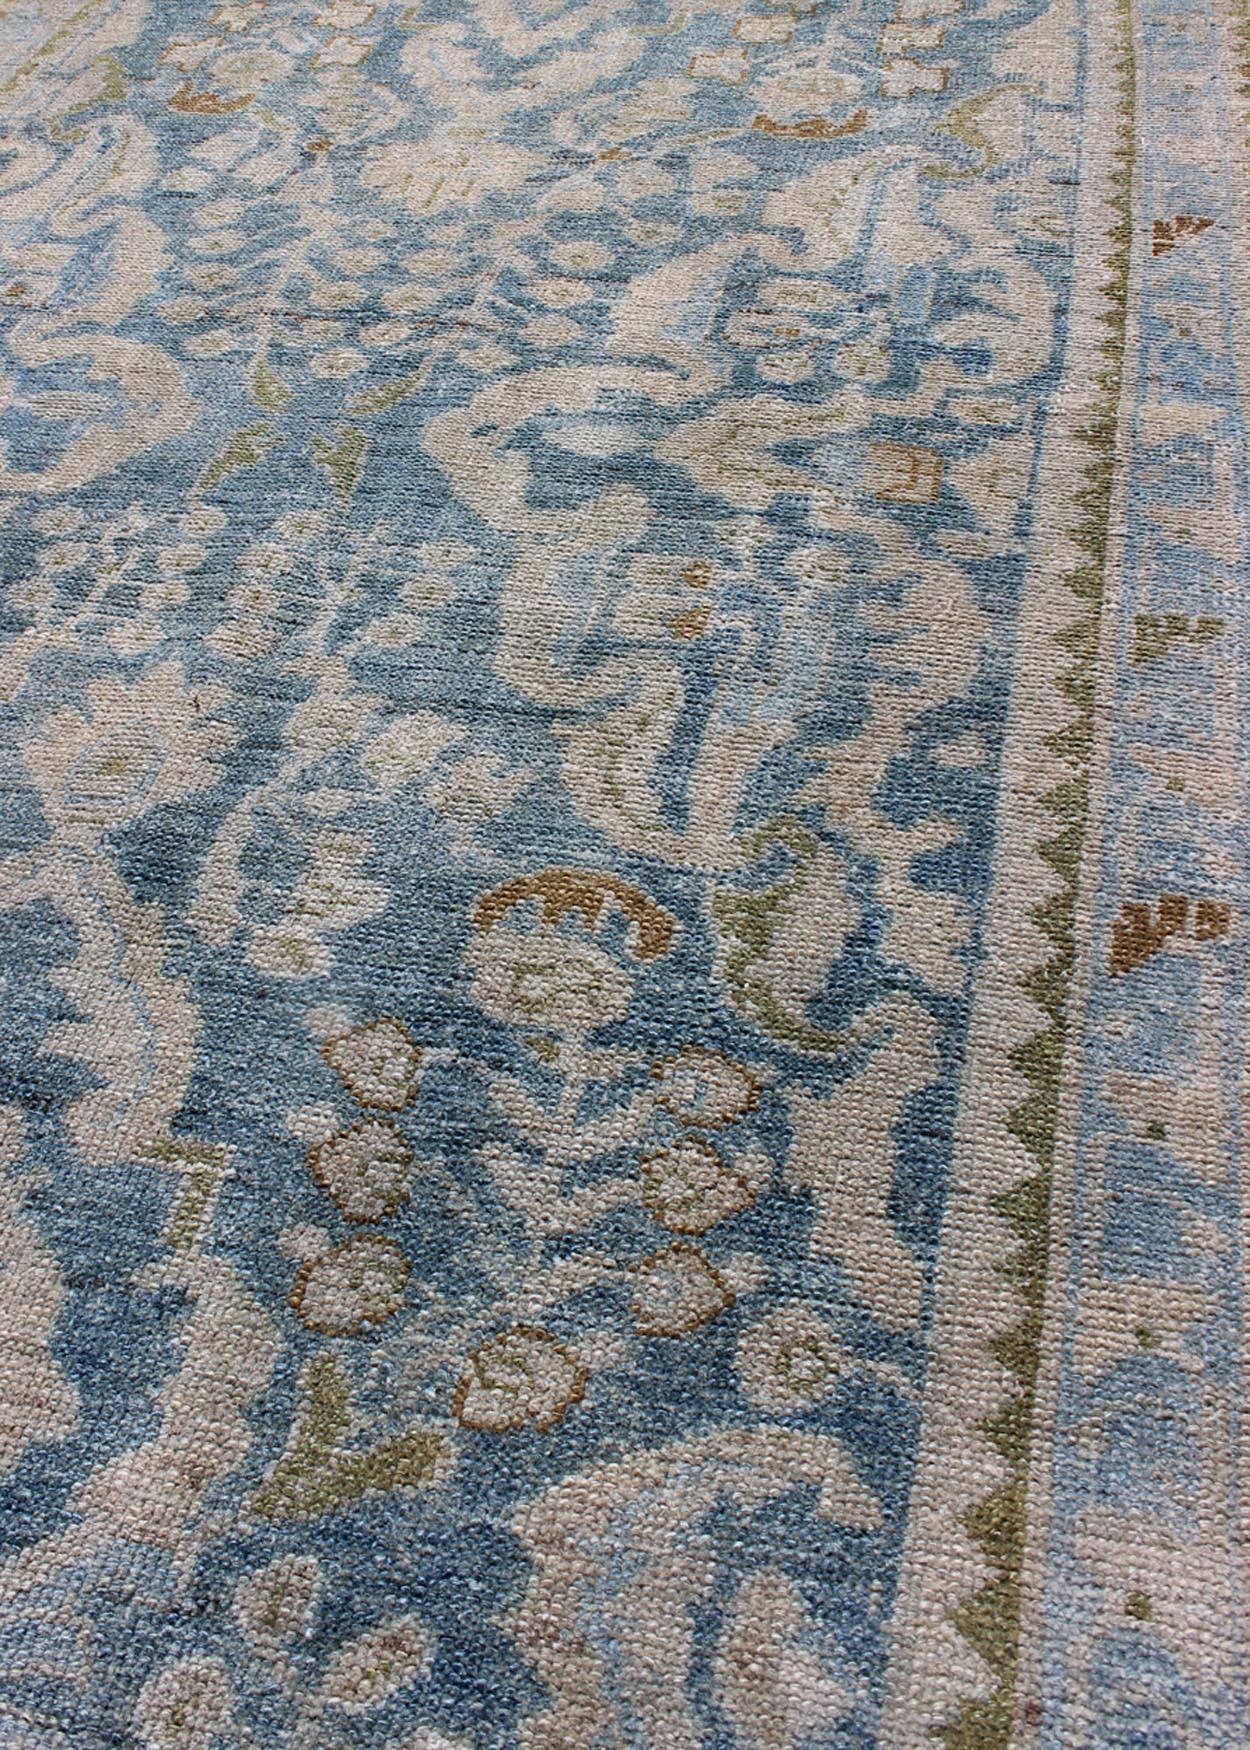 Early 20th Century Antique Persian Malayer Runner with All-Over Design in Blue and Hints of Olive